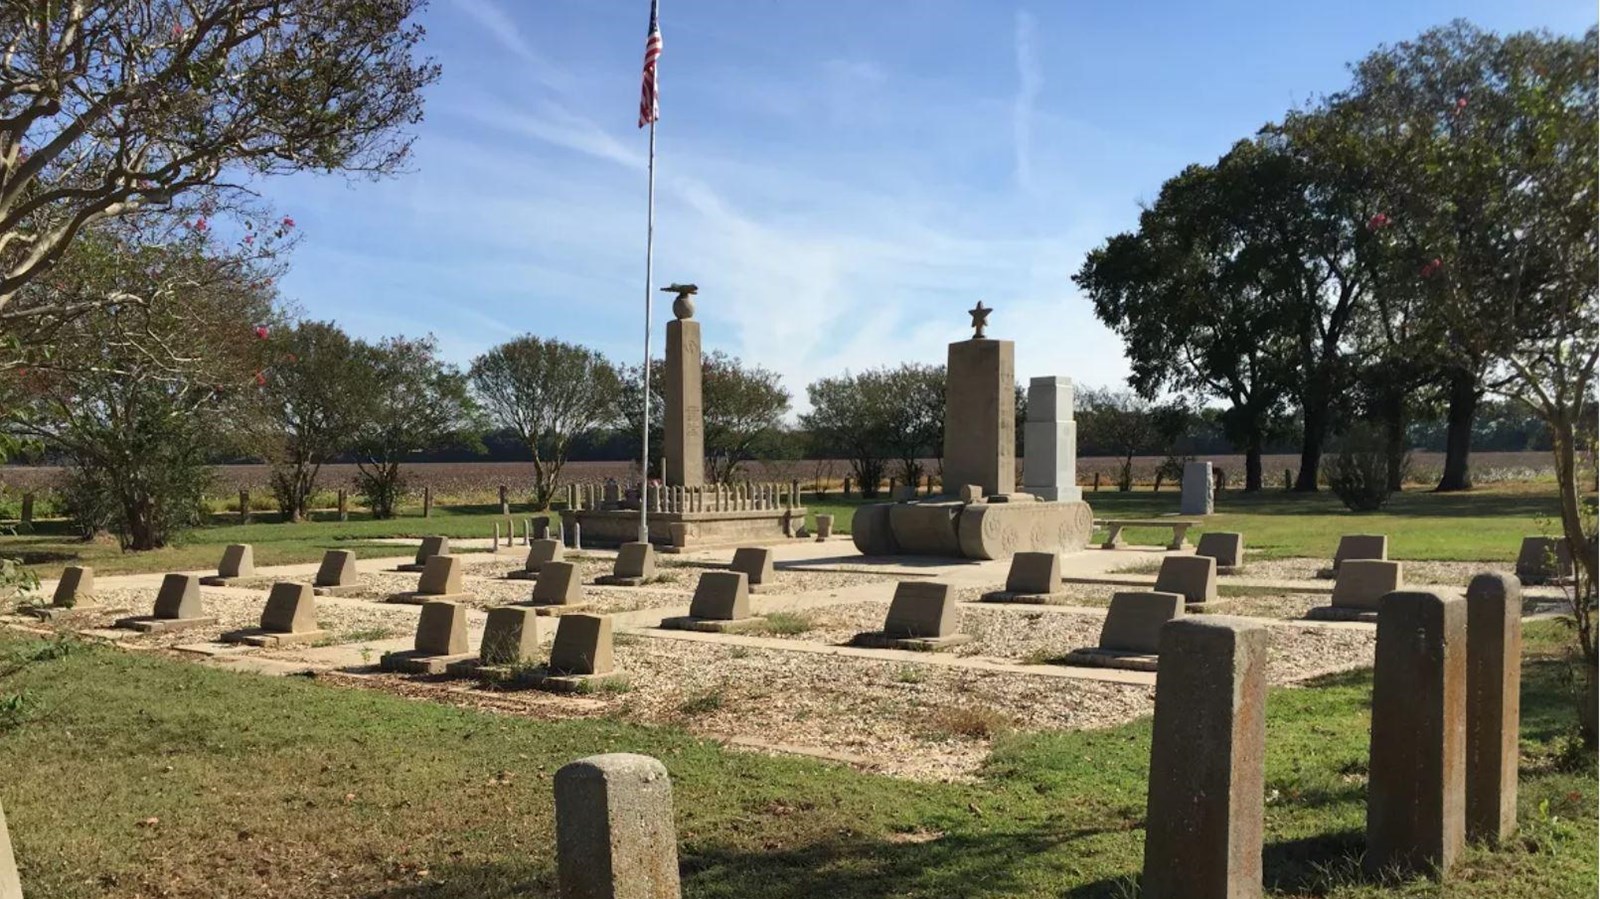 Cemetery with headstones, U.S. flag, and three monuments surrounded by grass.